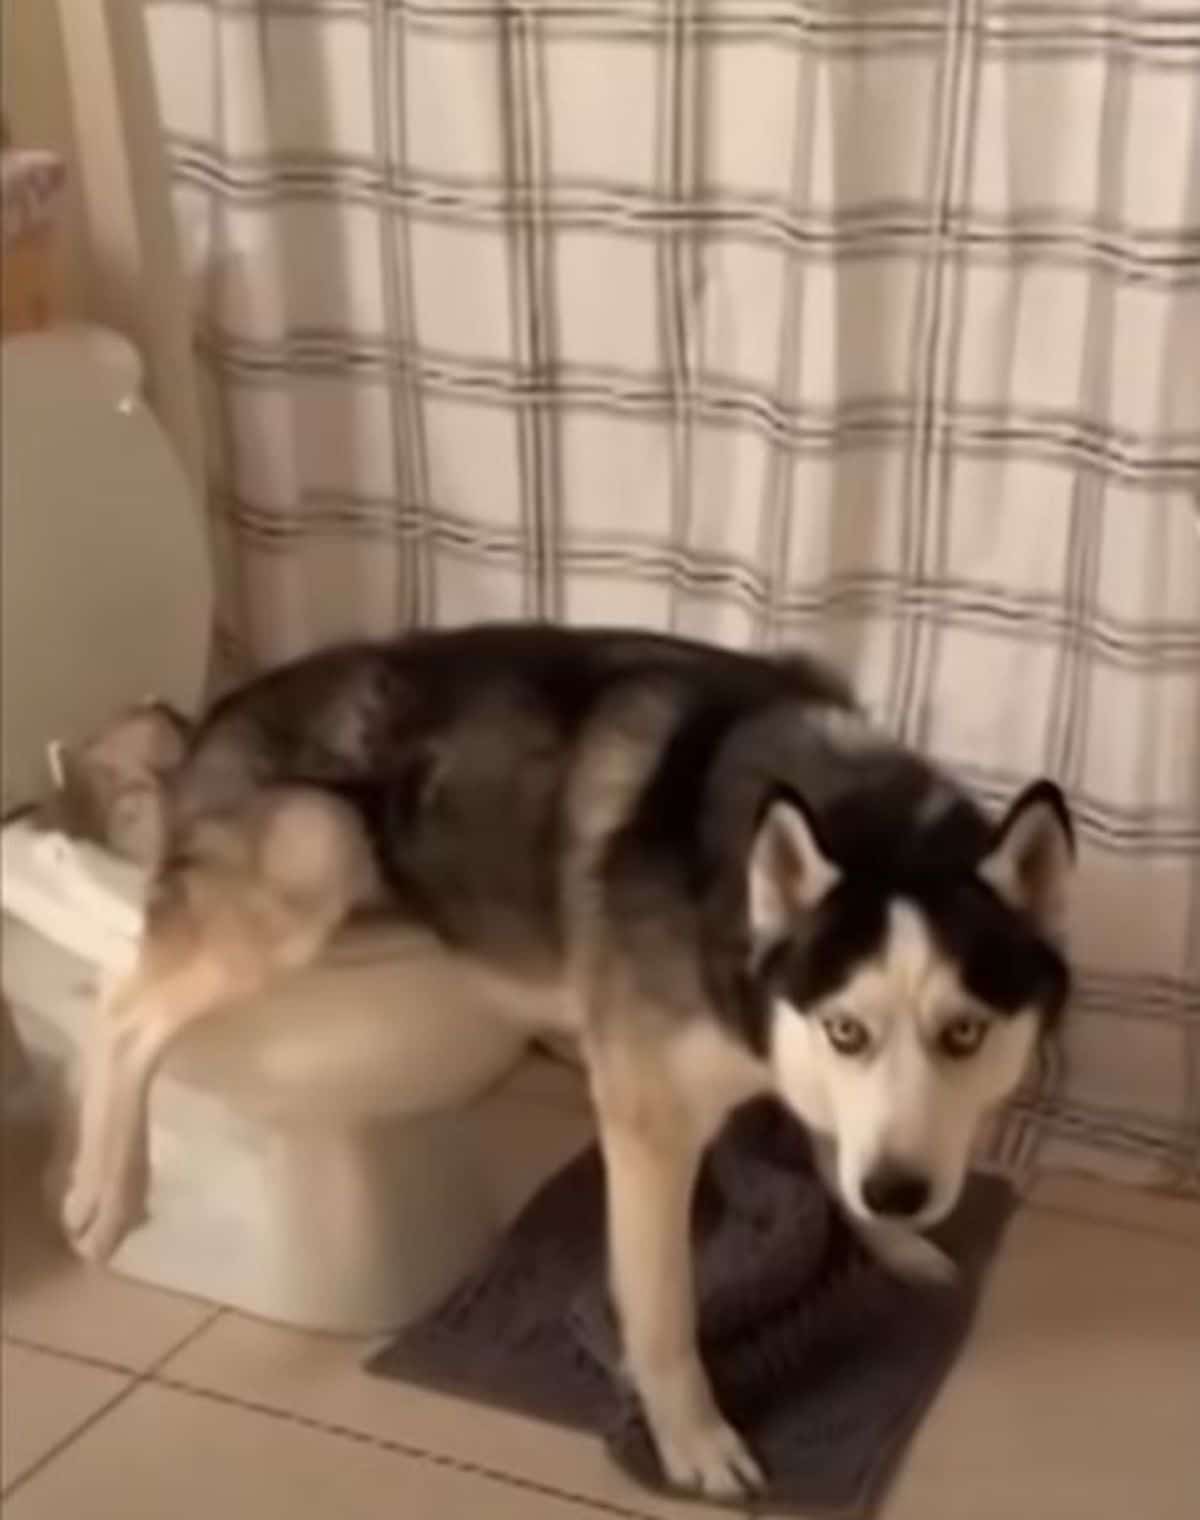 husky using the toilet with its front legs on the floor